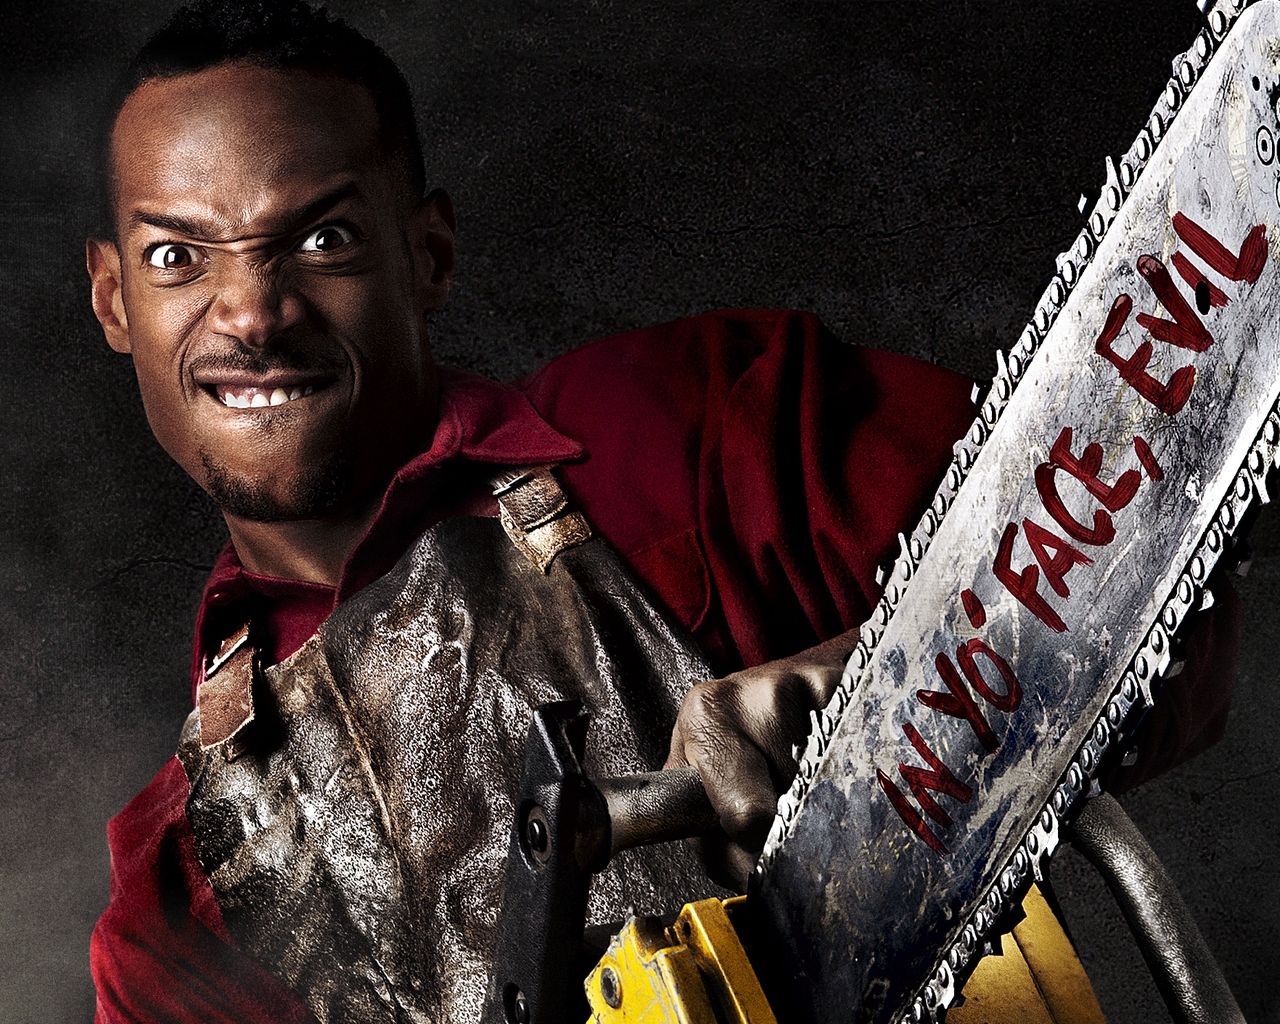 A Haunted House Marlon Wayans for 1280 x 1024 resolution